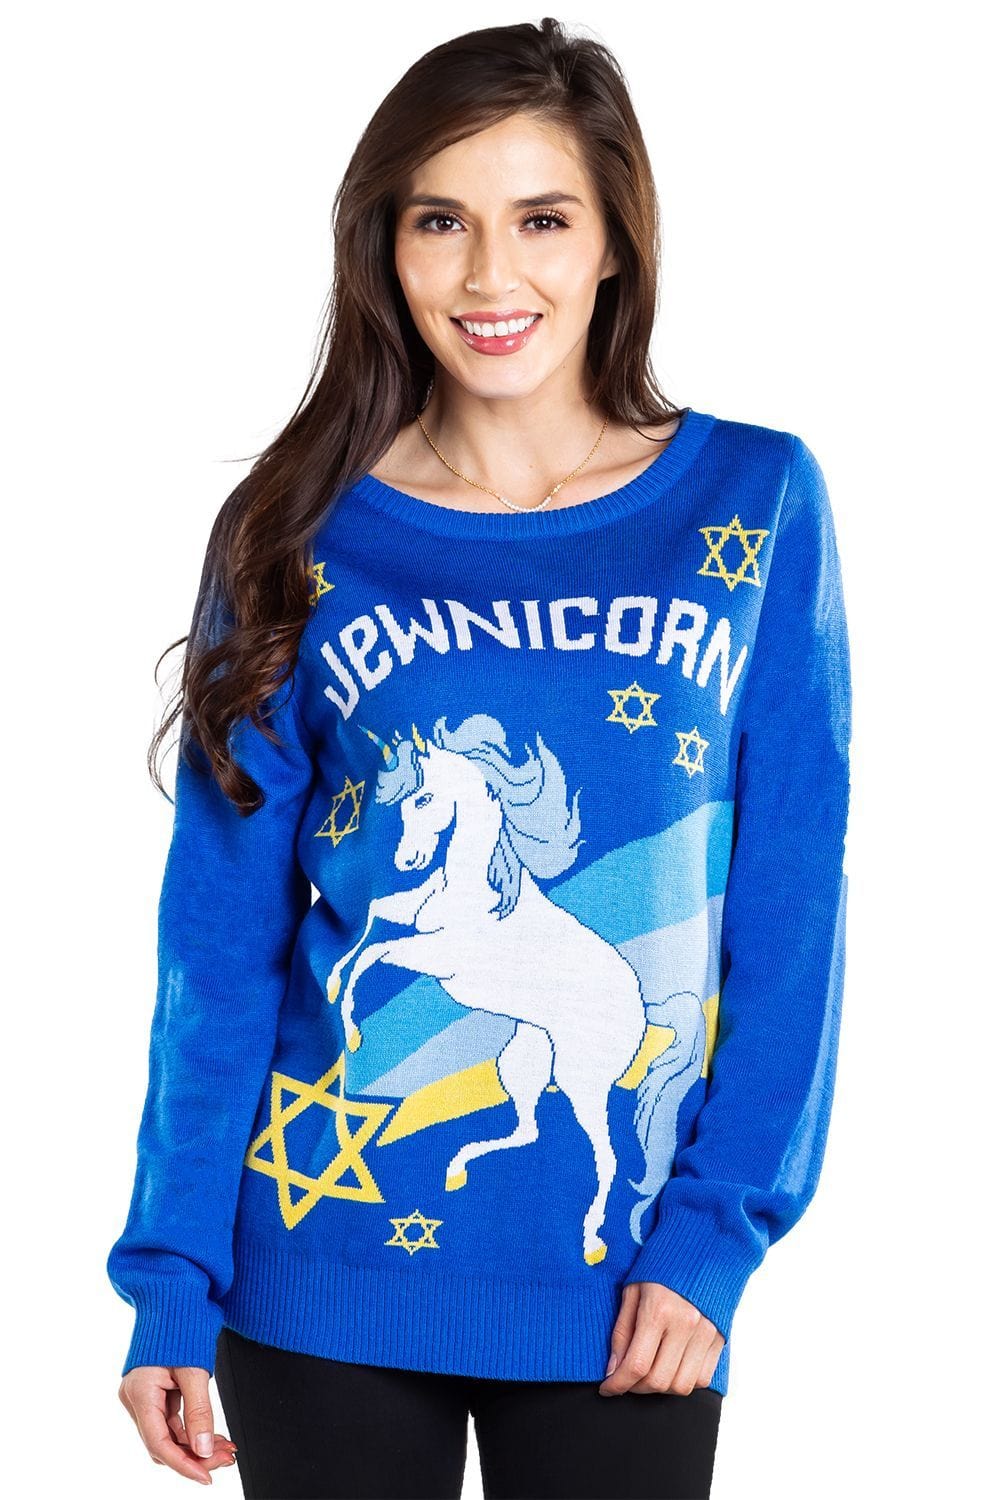 Tipsy Elves Sweaters Women's Jewnicorn Sweater - by Tipsy Elves